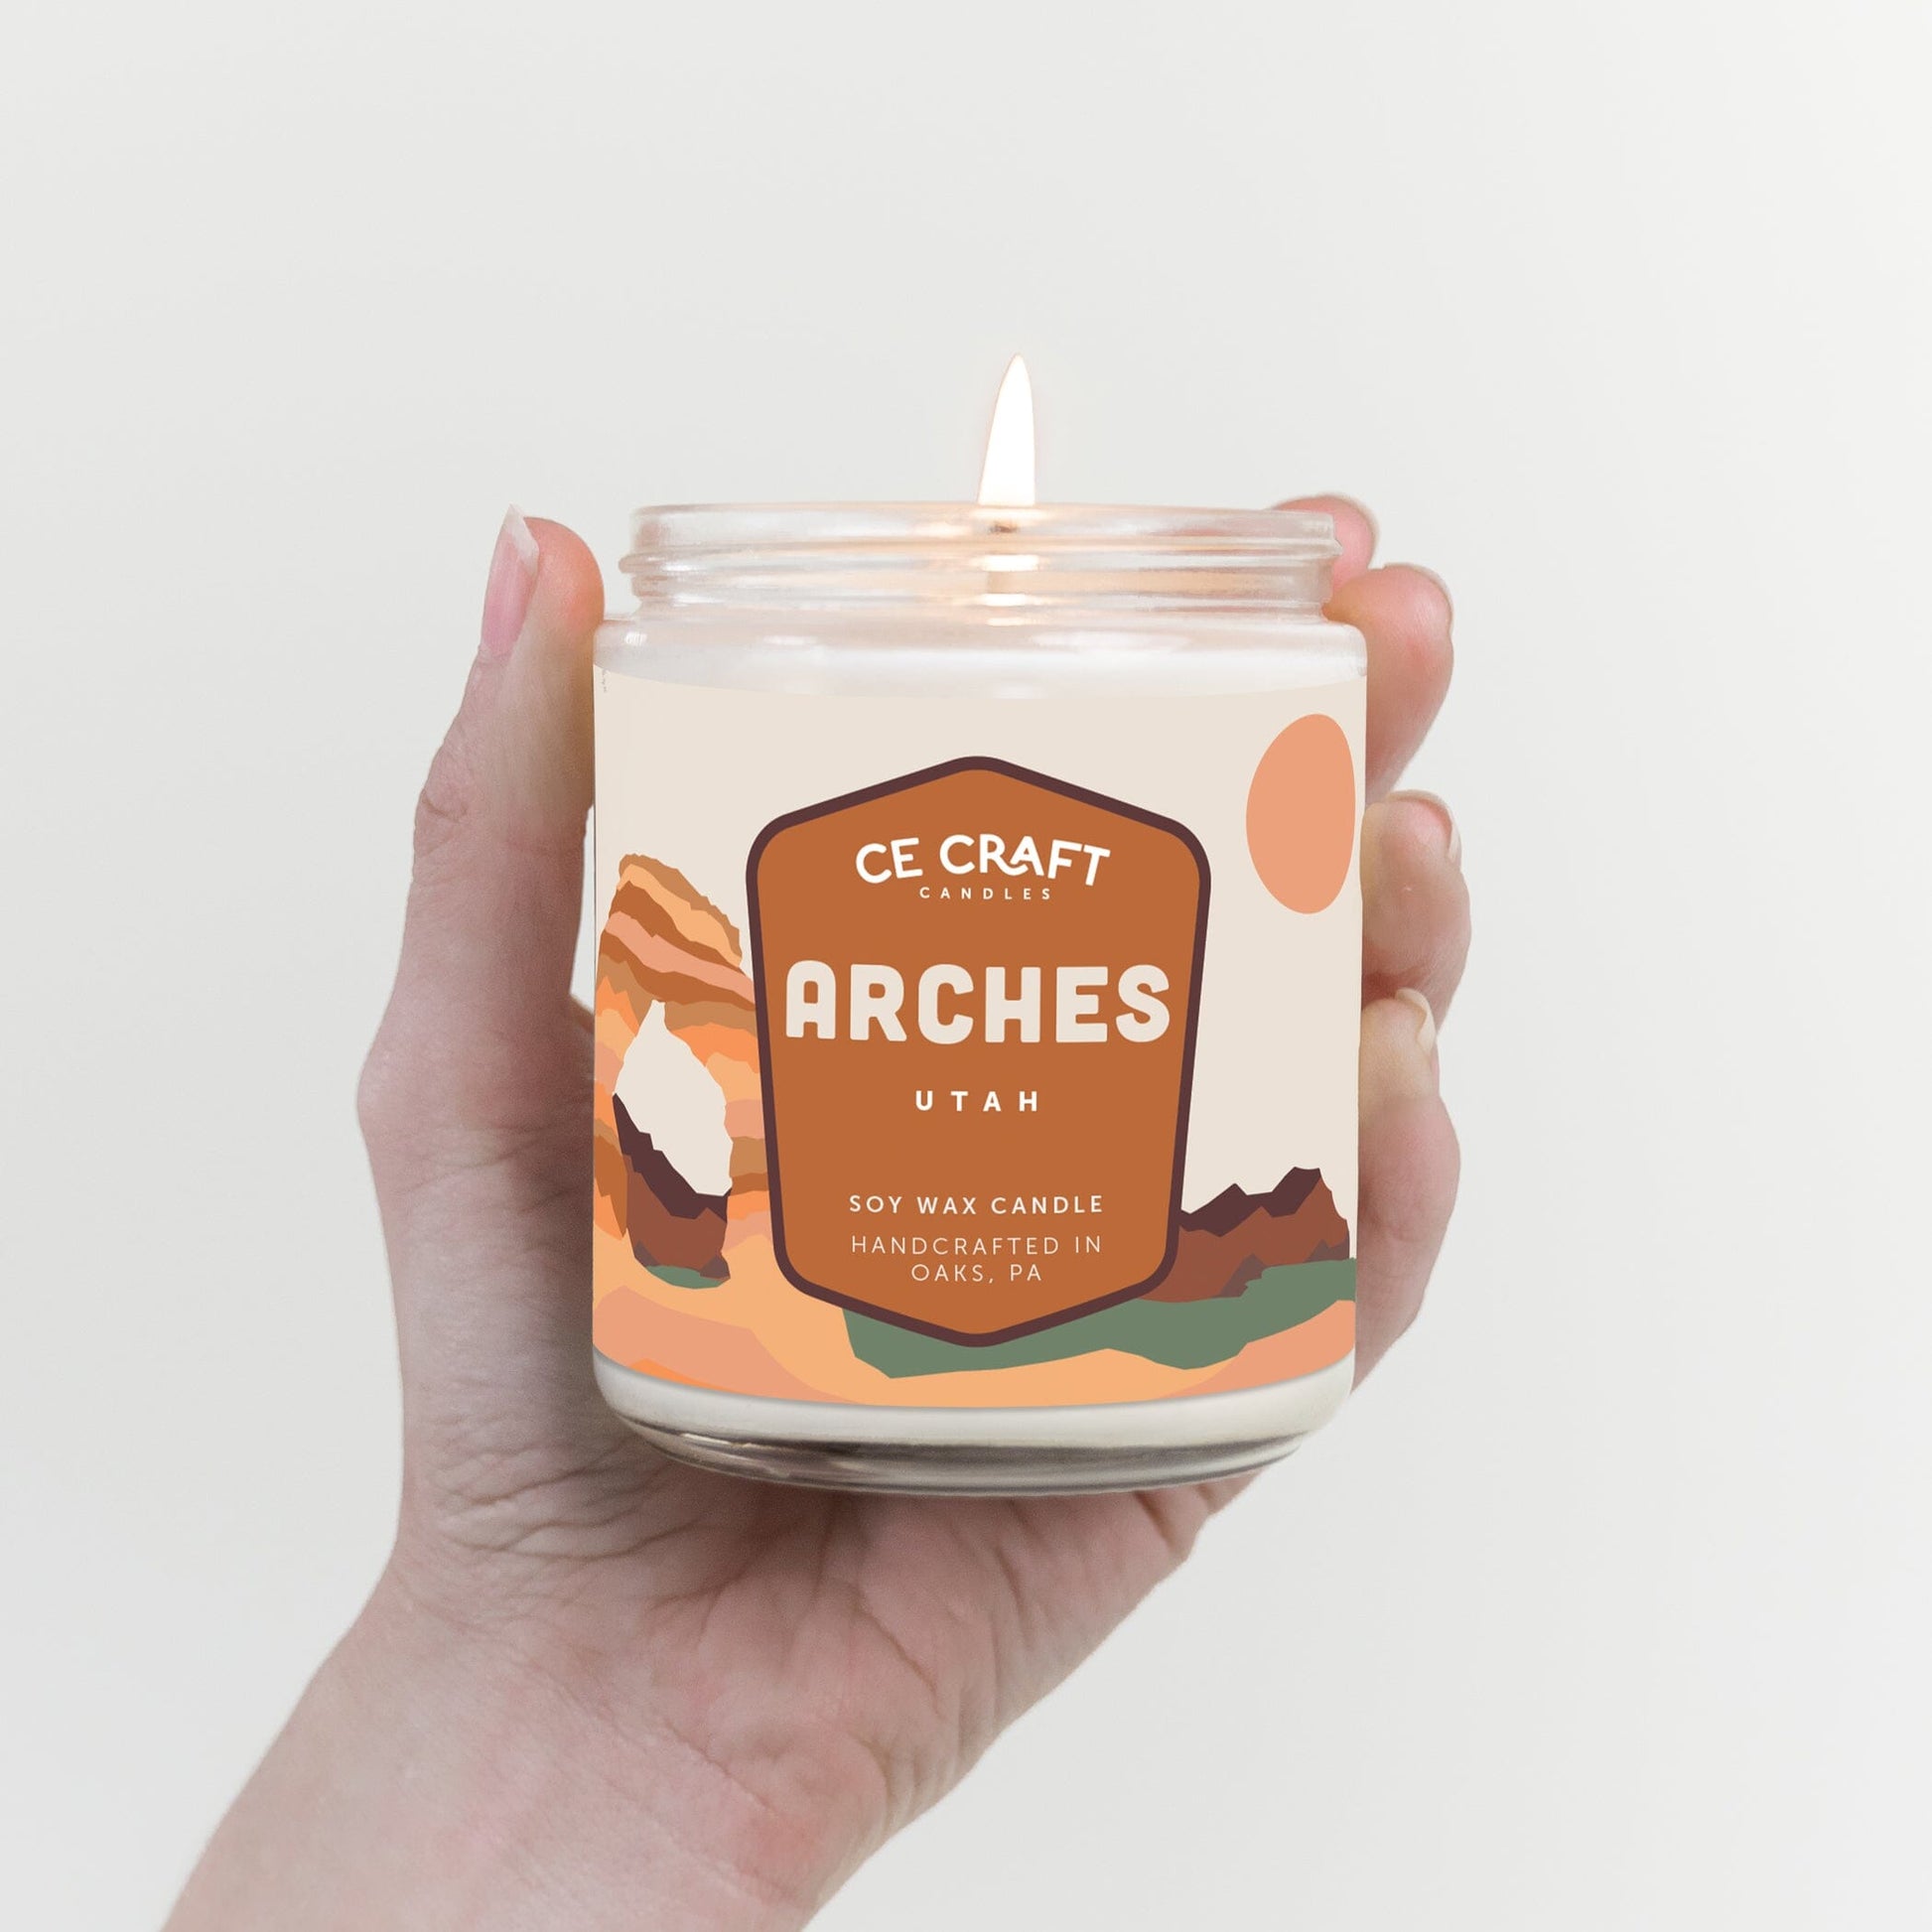 Arches National Park Candle Candles CE Craft 